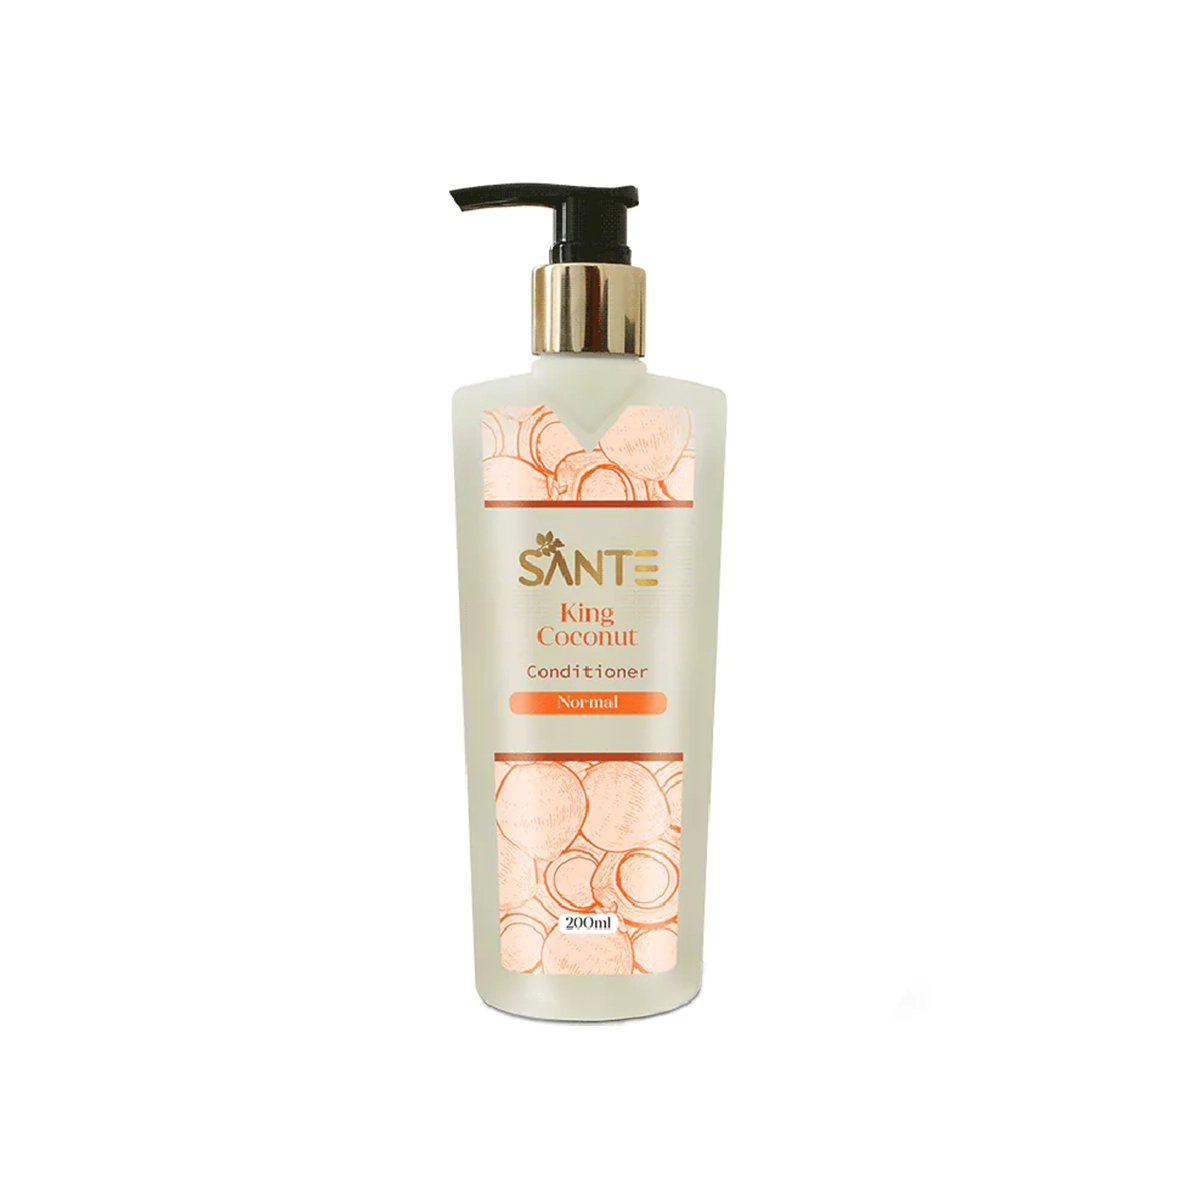 First product image of Sante King Coconut Conditioner 200ml